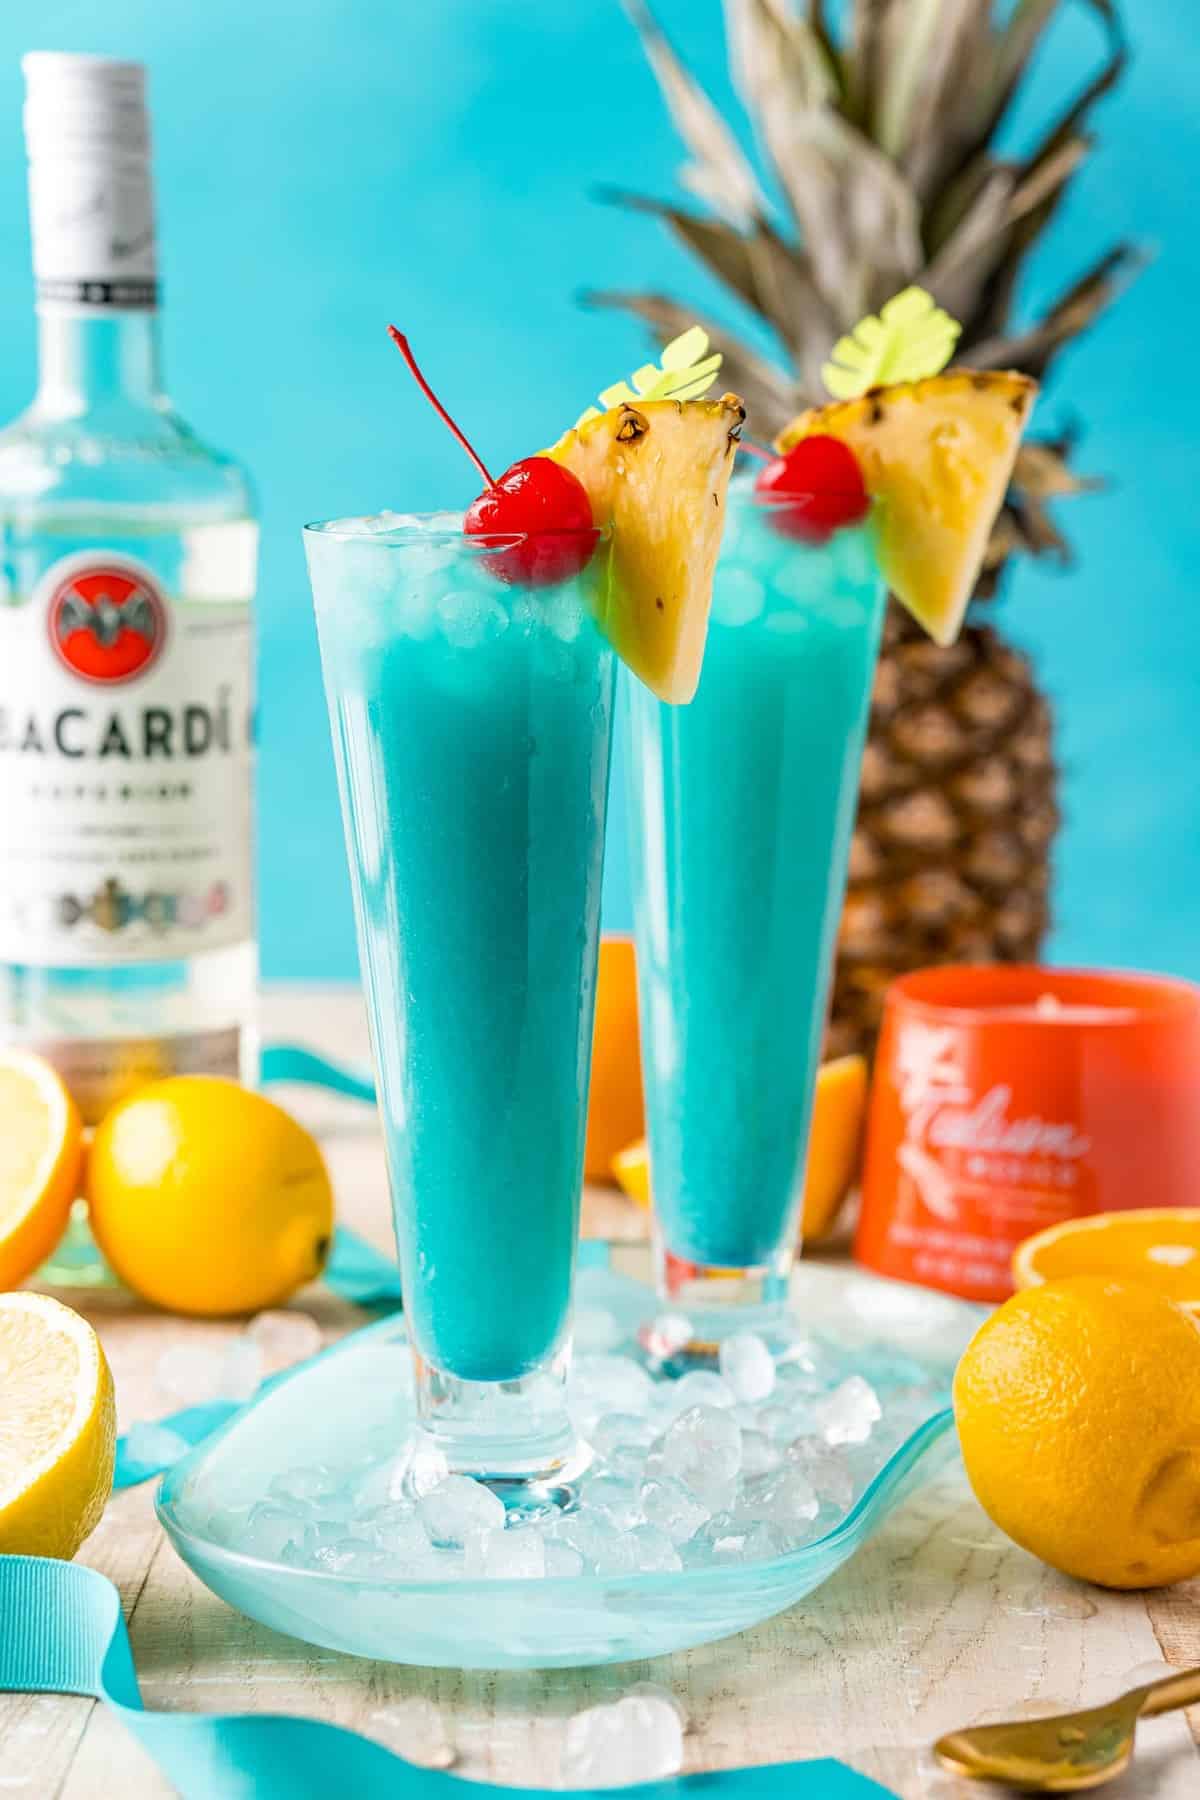 Two bright blue cocktails garnished with a pineapple wedge and a cherry.